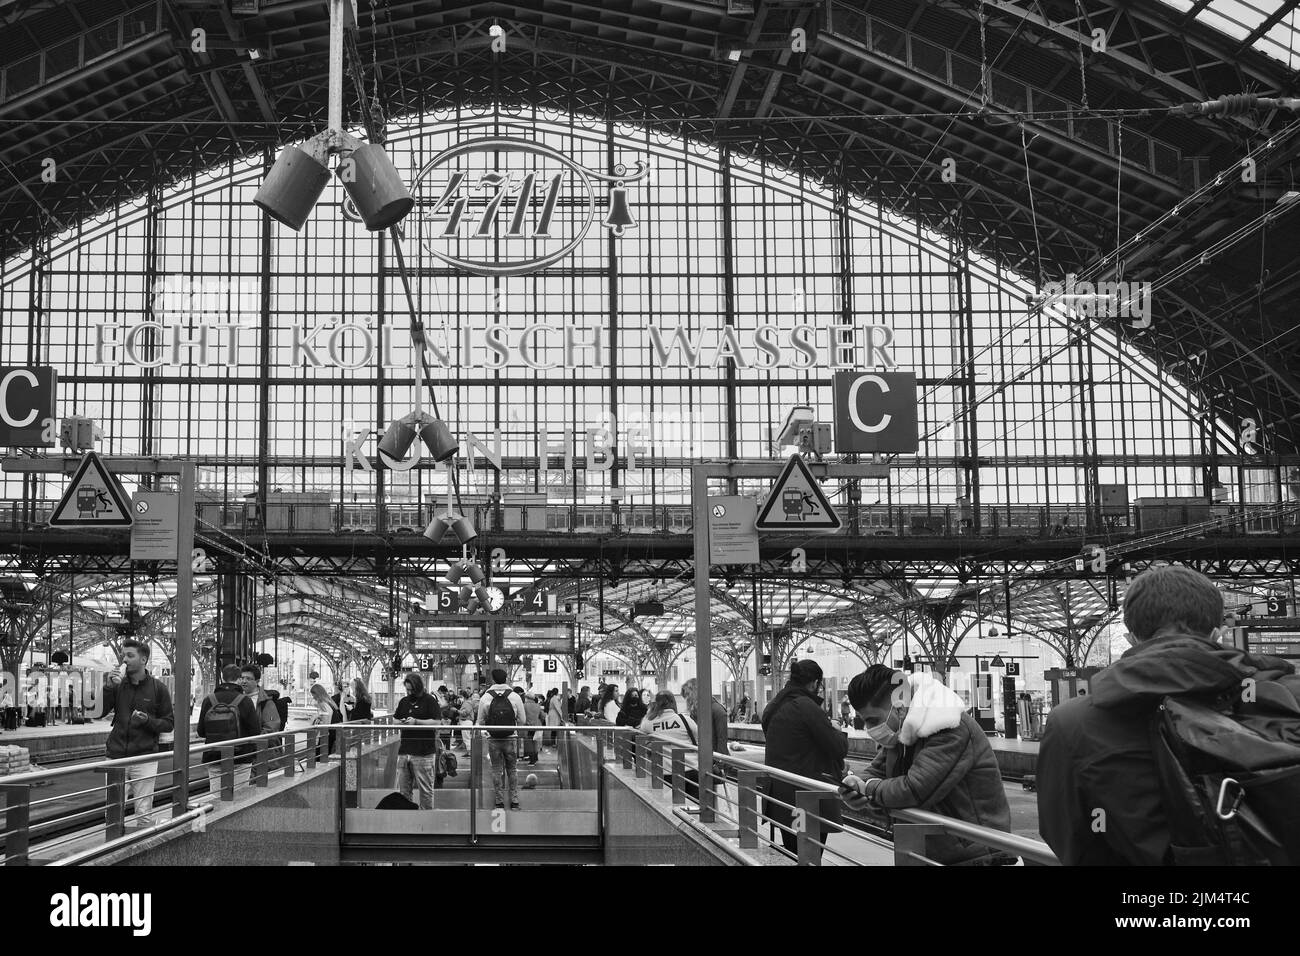 View of Cologne Central Station, black and white photo Stock Photo